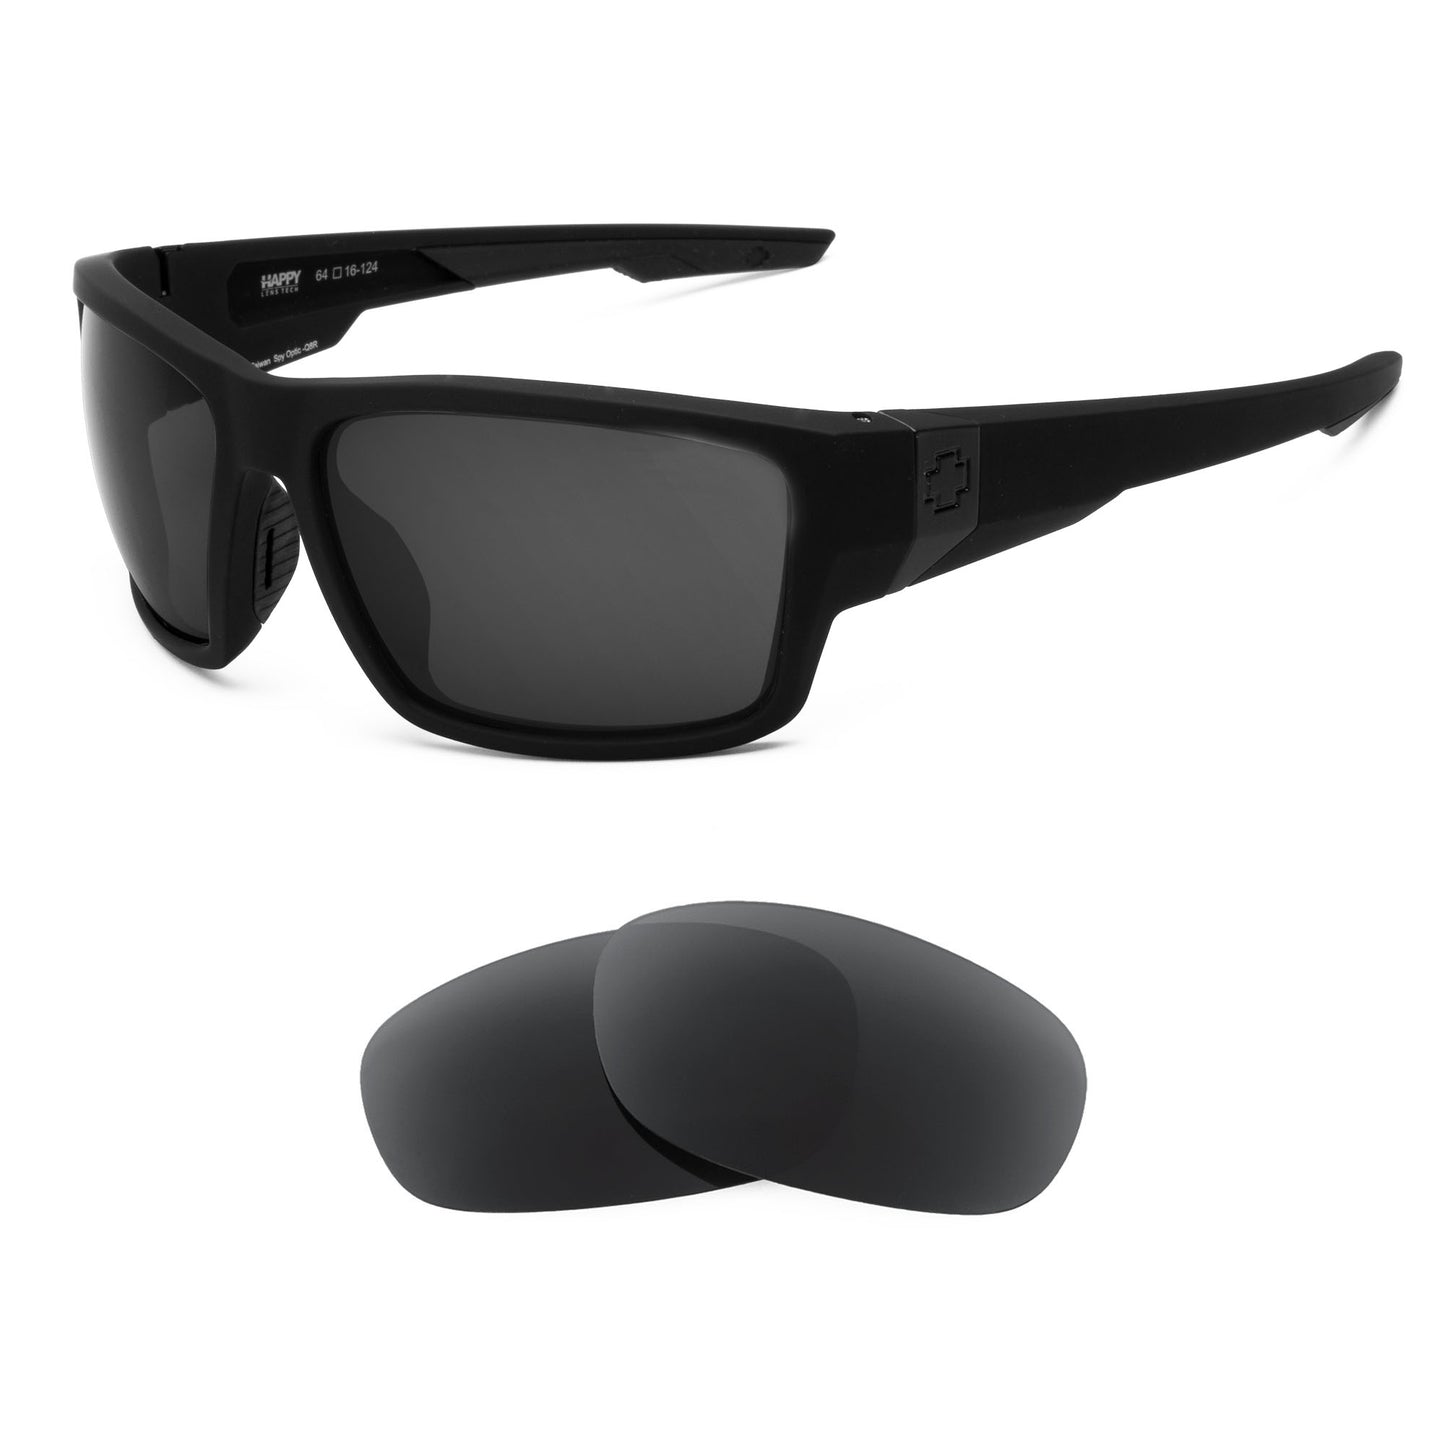 Spy Optic Dirty Mo Tech sunglasses with replacement lenses